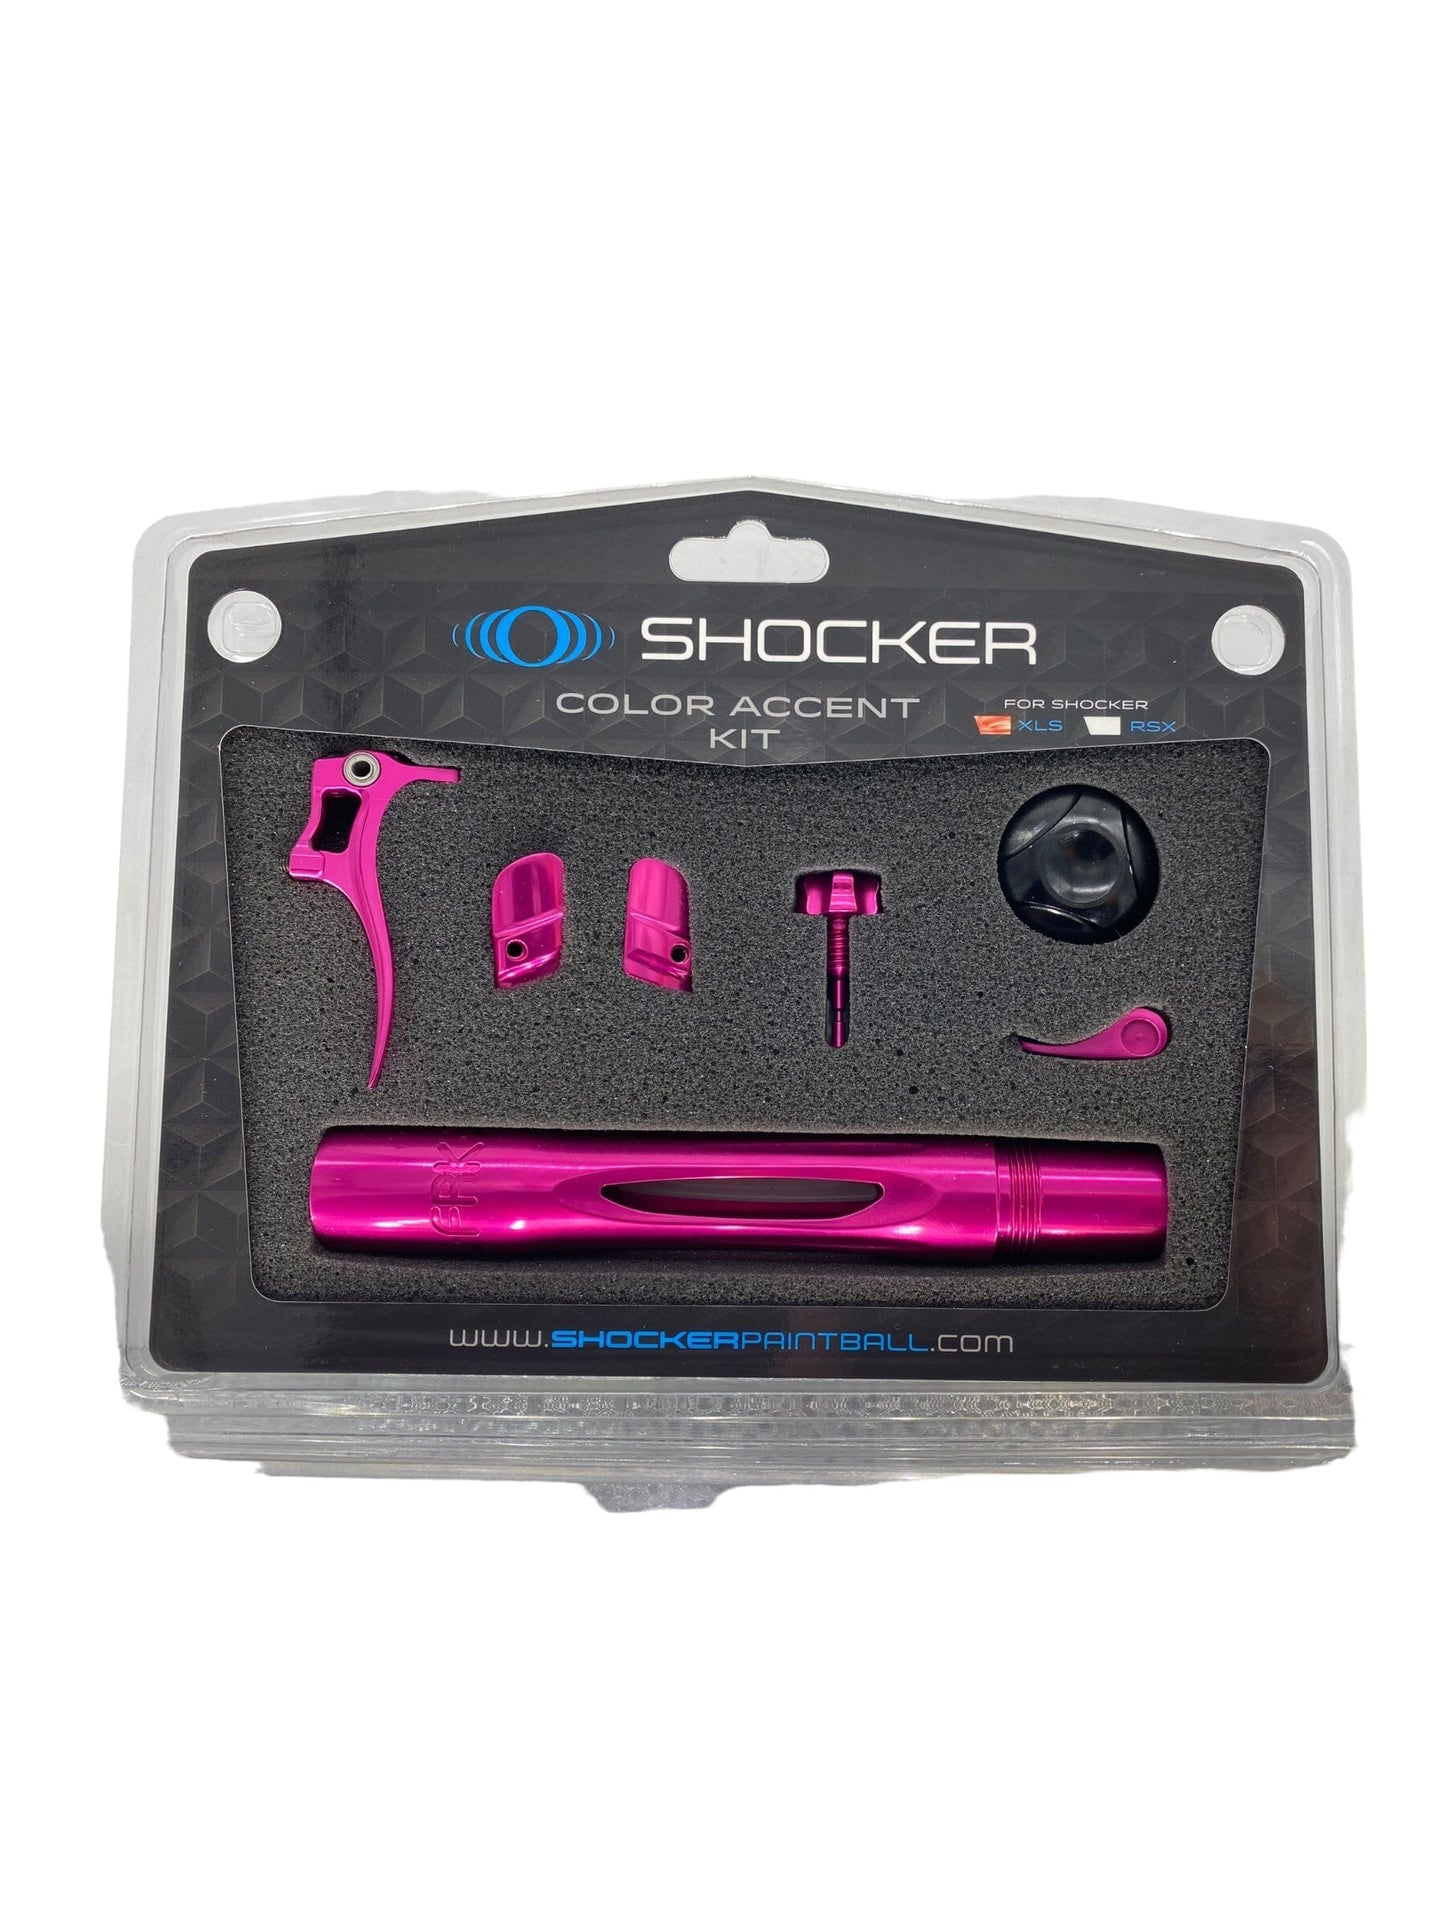 Used Shocker XLS Color Accent Kit- Pink Paintball Gun from CPXBrosPaintball Buy/Sell/Trade Paintball Markers, New Paintball Guns, Paintball Hoppers, Paintball Masks, and Hormesis Headbands